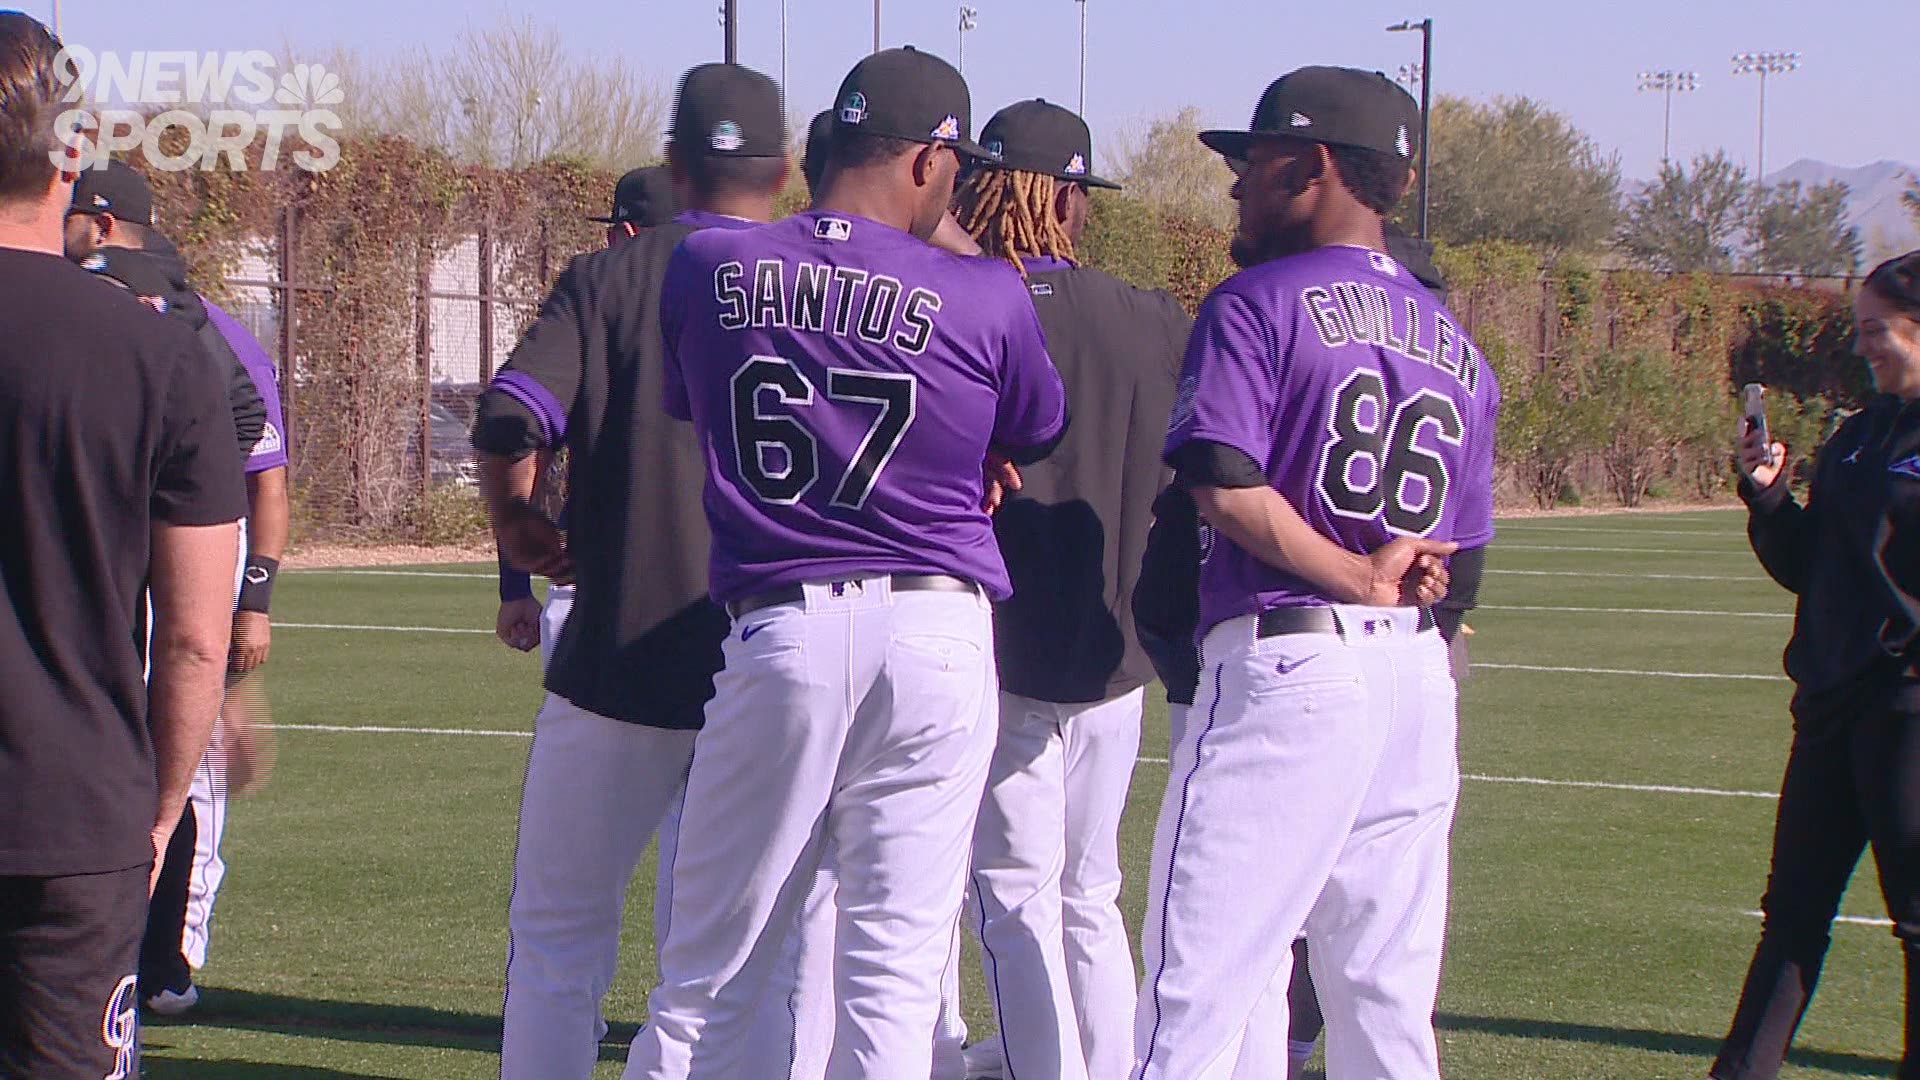 Our latest MIC'd Up Monday comes from Salt River Field in Scottsdale, Ariz., as the Colorado Rockies report for spring training.